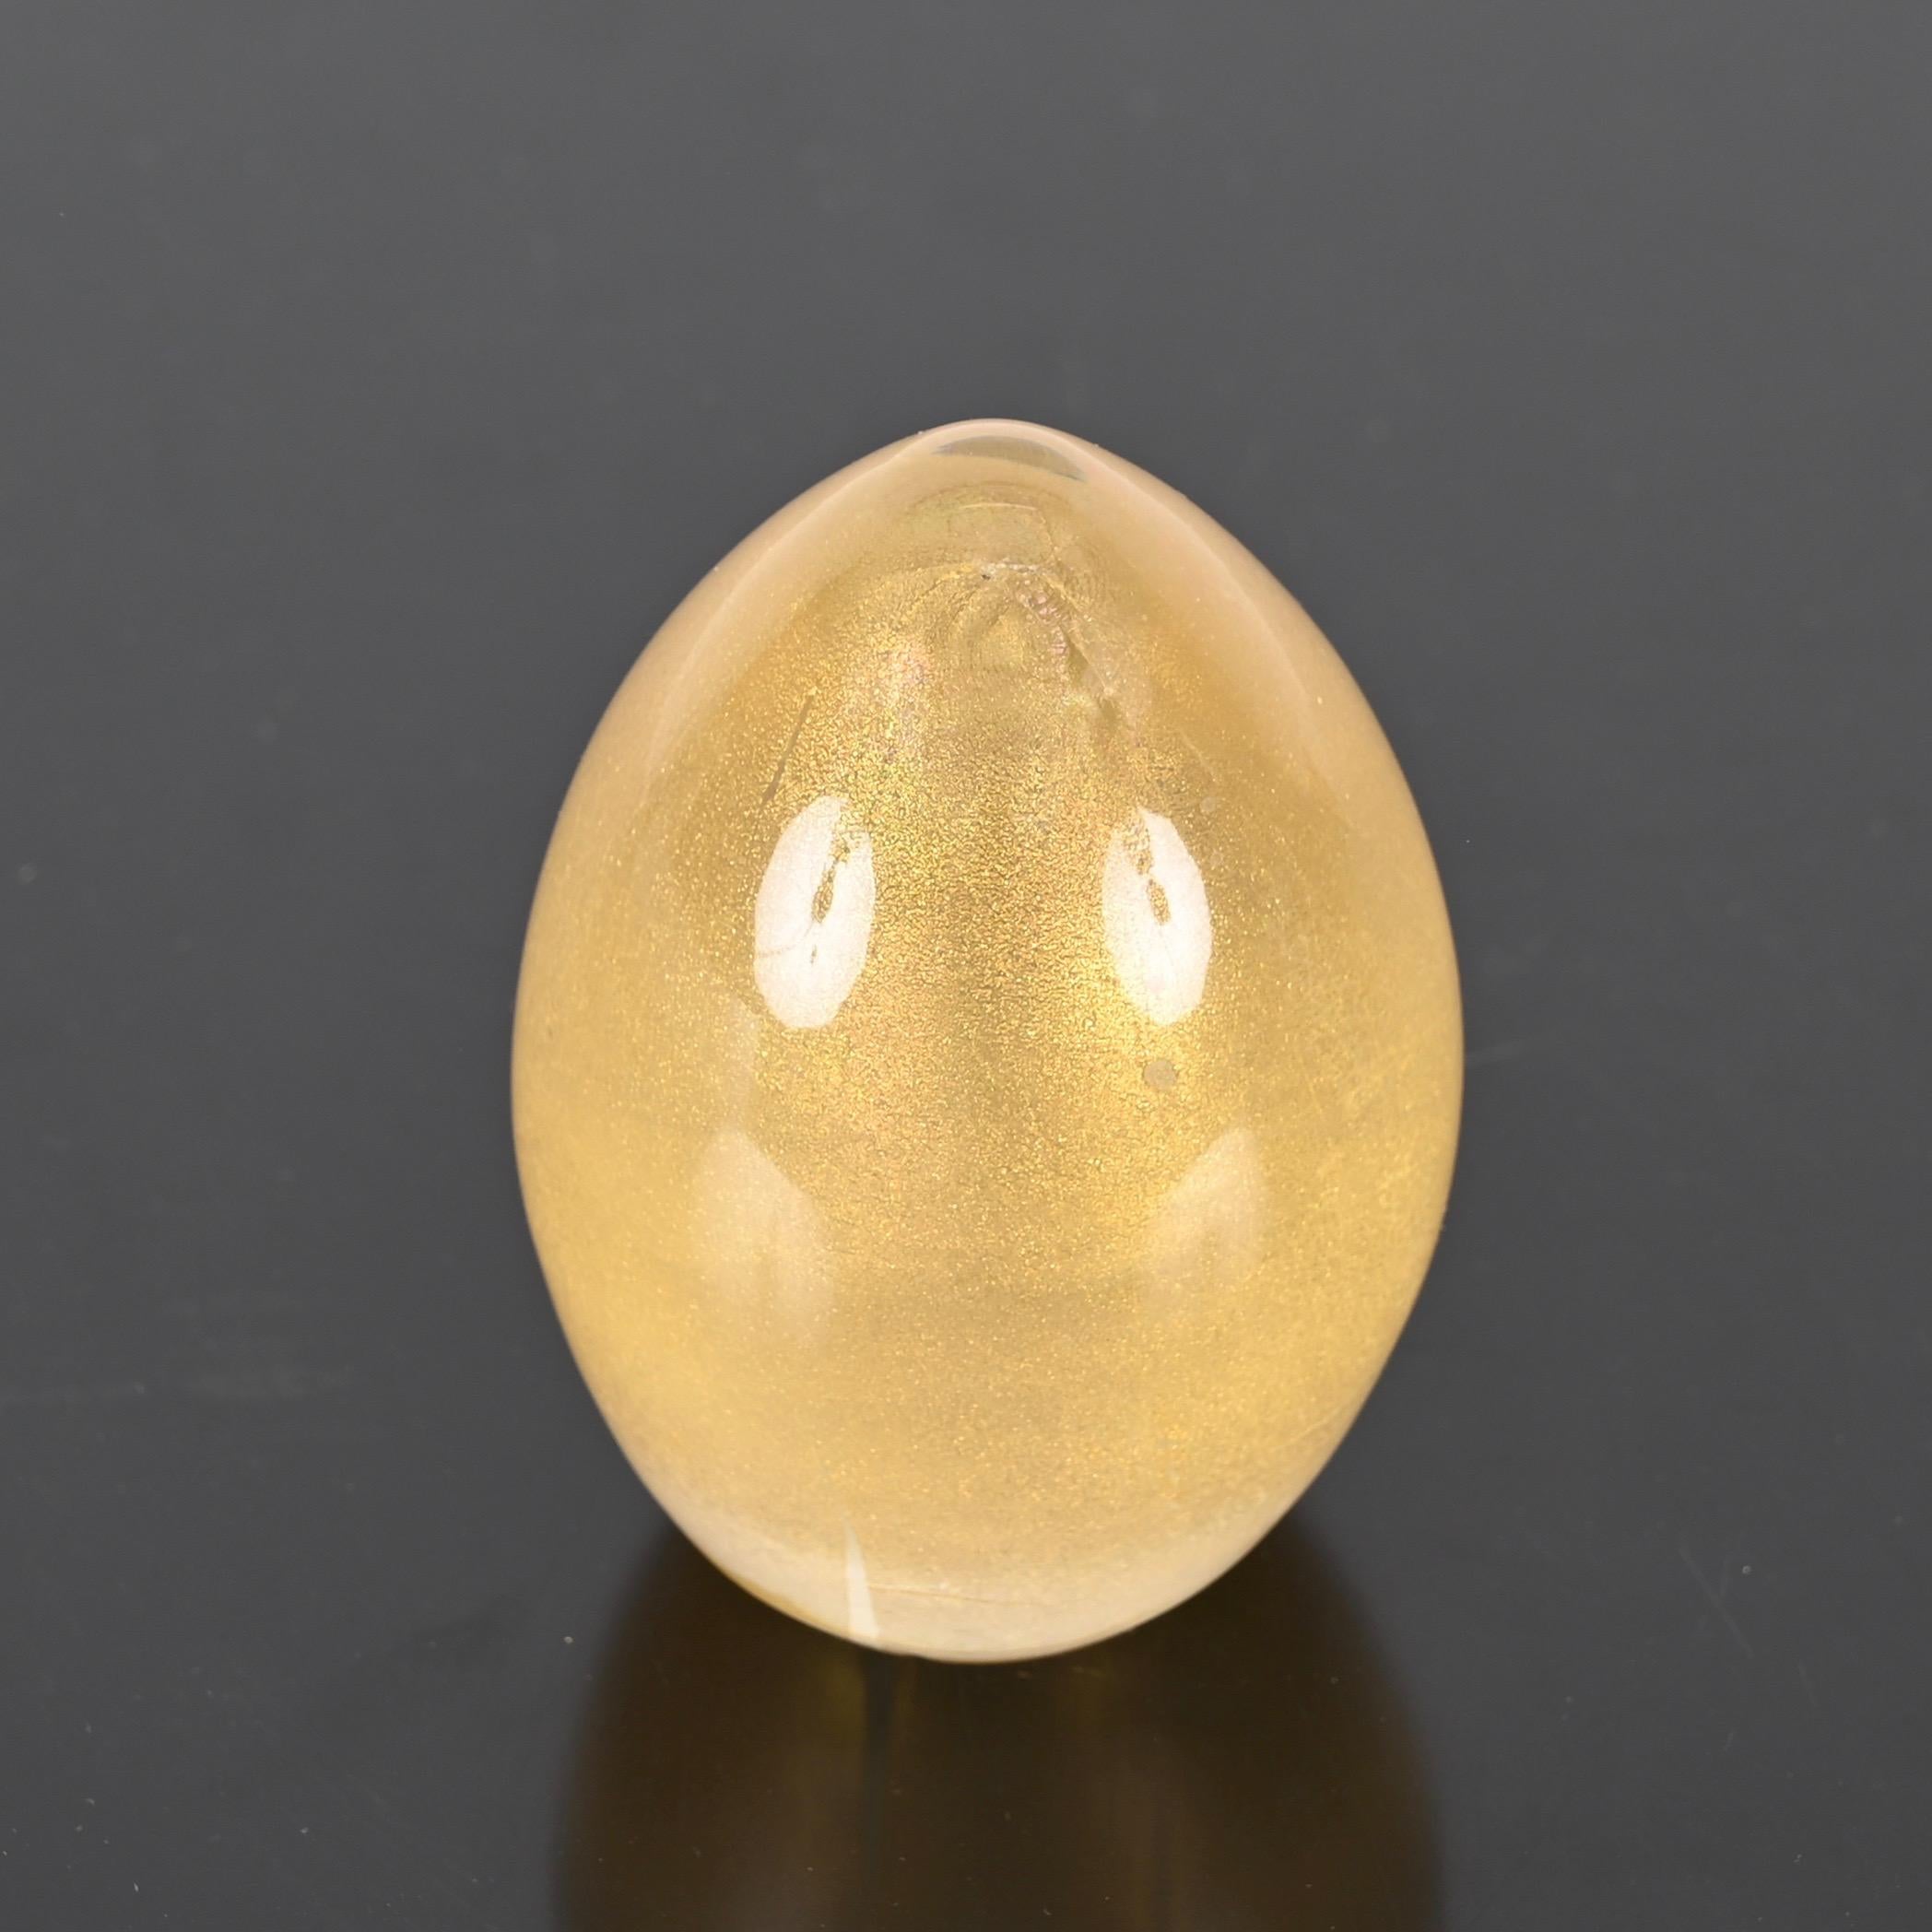 Fantastic egg-shaped paperweight made in mouth-blown Murano glass with gold leaf inside. This incredibly charming paperweight was designed by Archimede Seguso in Italy during the 1950s.

In amazing conditions with no chips or scratches, this stylish